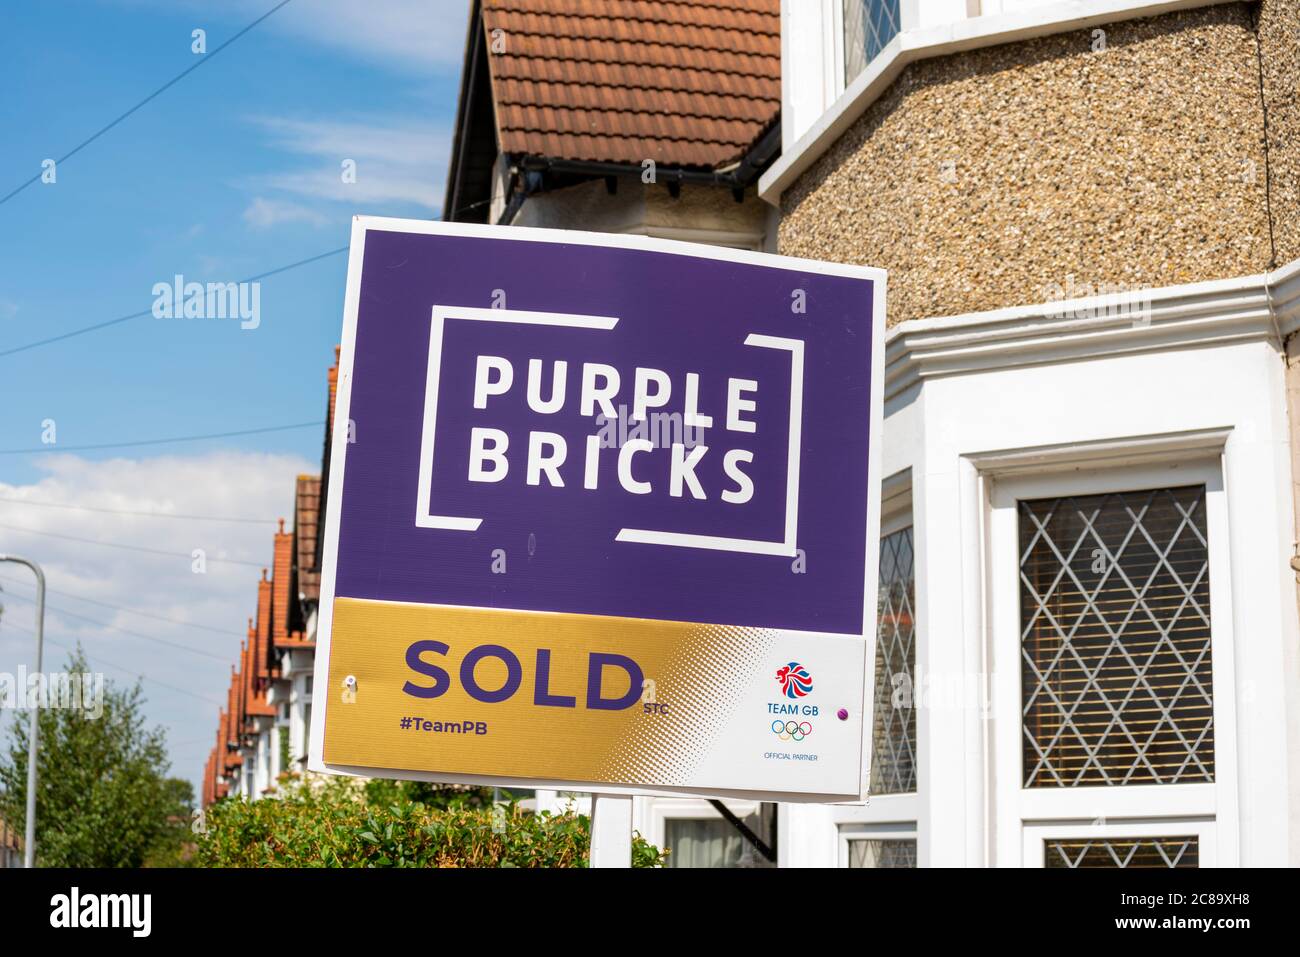 Purple Bricks estate agent sold sign outside property in Westcliff on Sea, Southend, Essex, UK. Team GB Olympics 2020 sponsorship. Tokyo 2020, 2021 Stock Photo